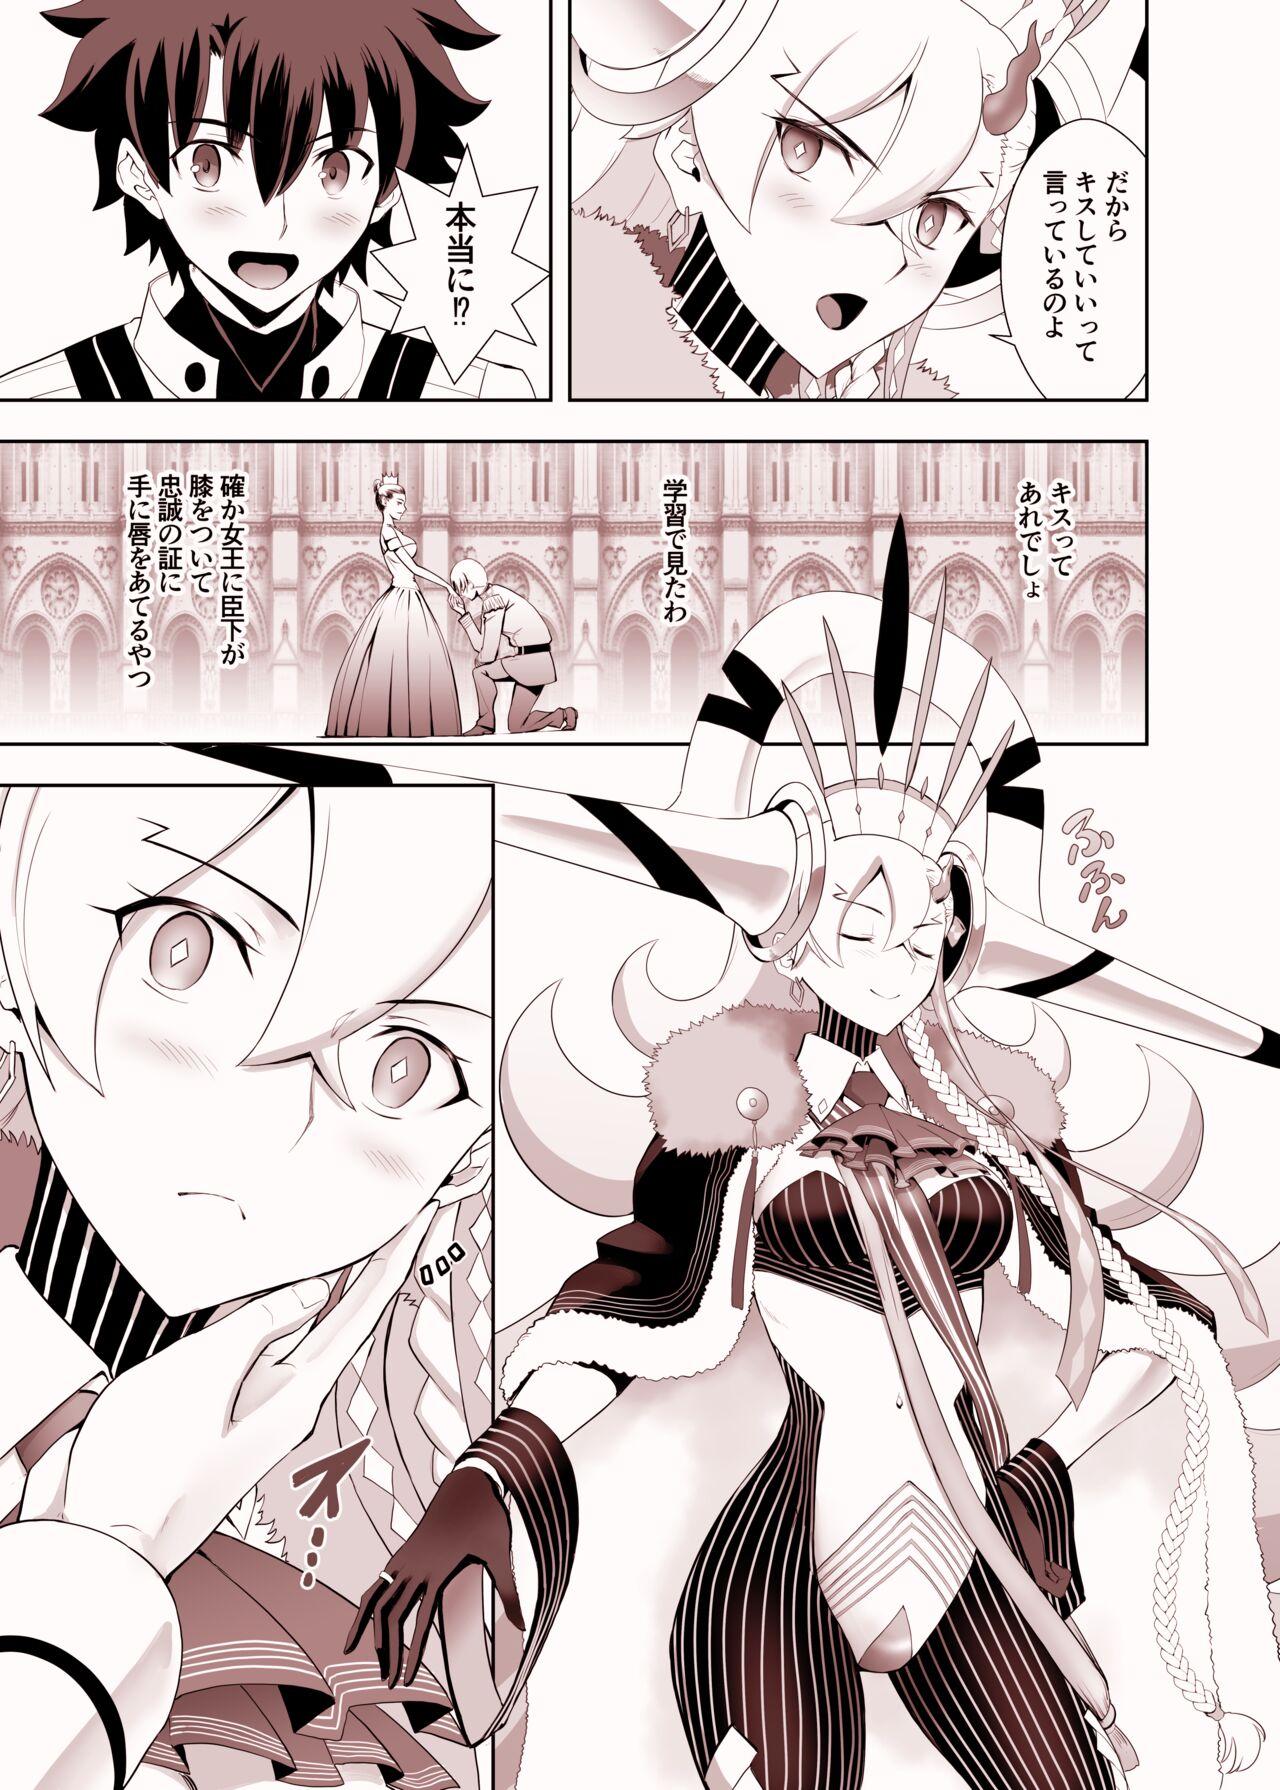 Bound Lovely U - Fate grand order Fleshlight - Page 4